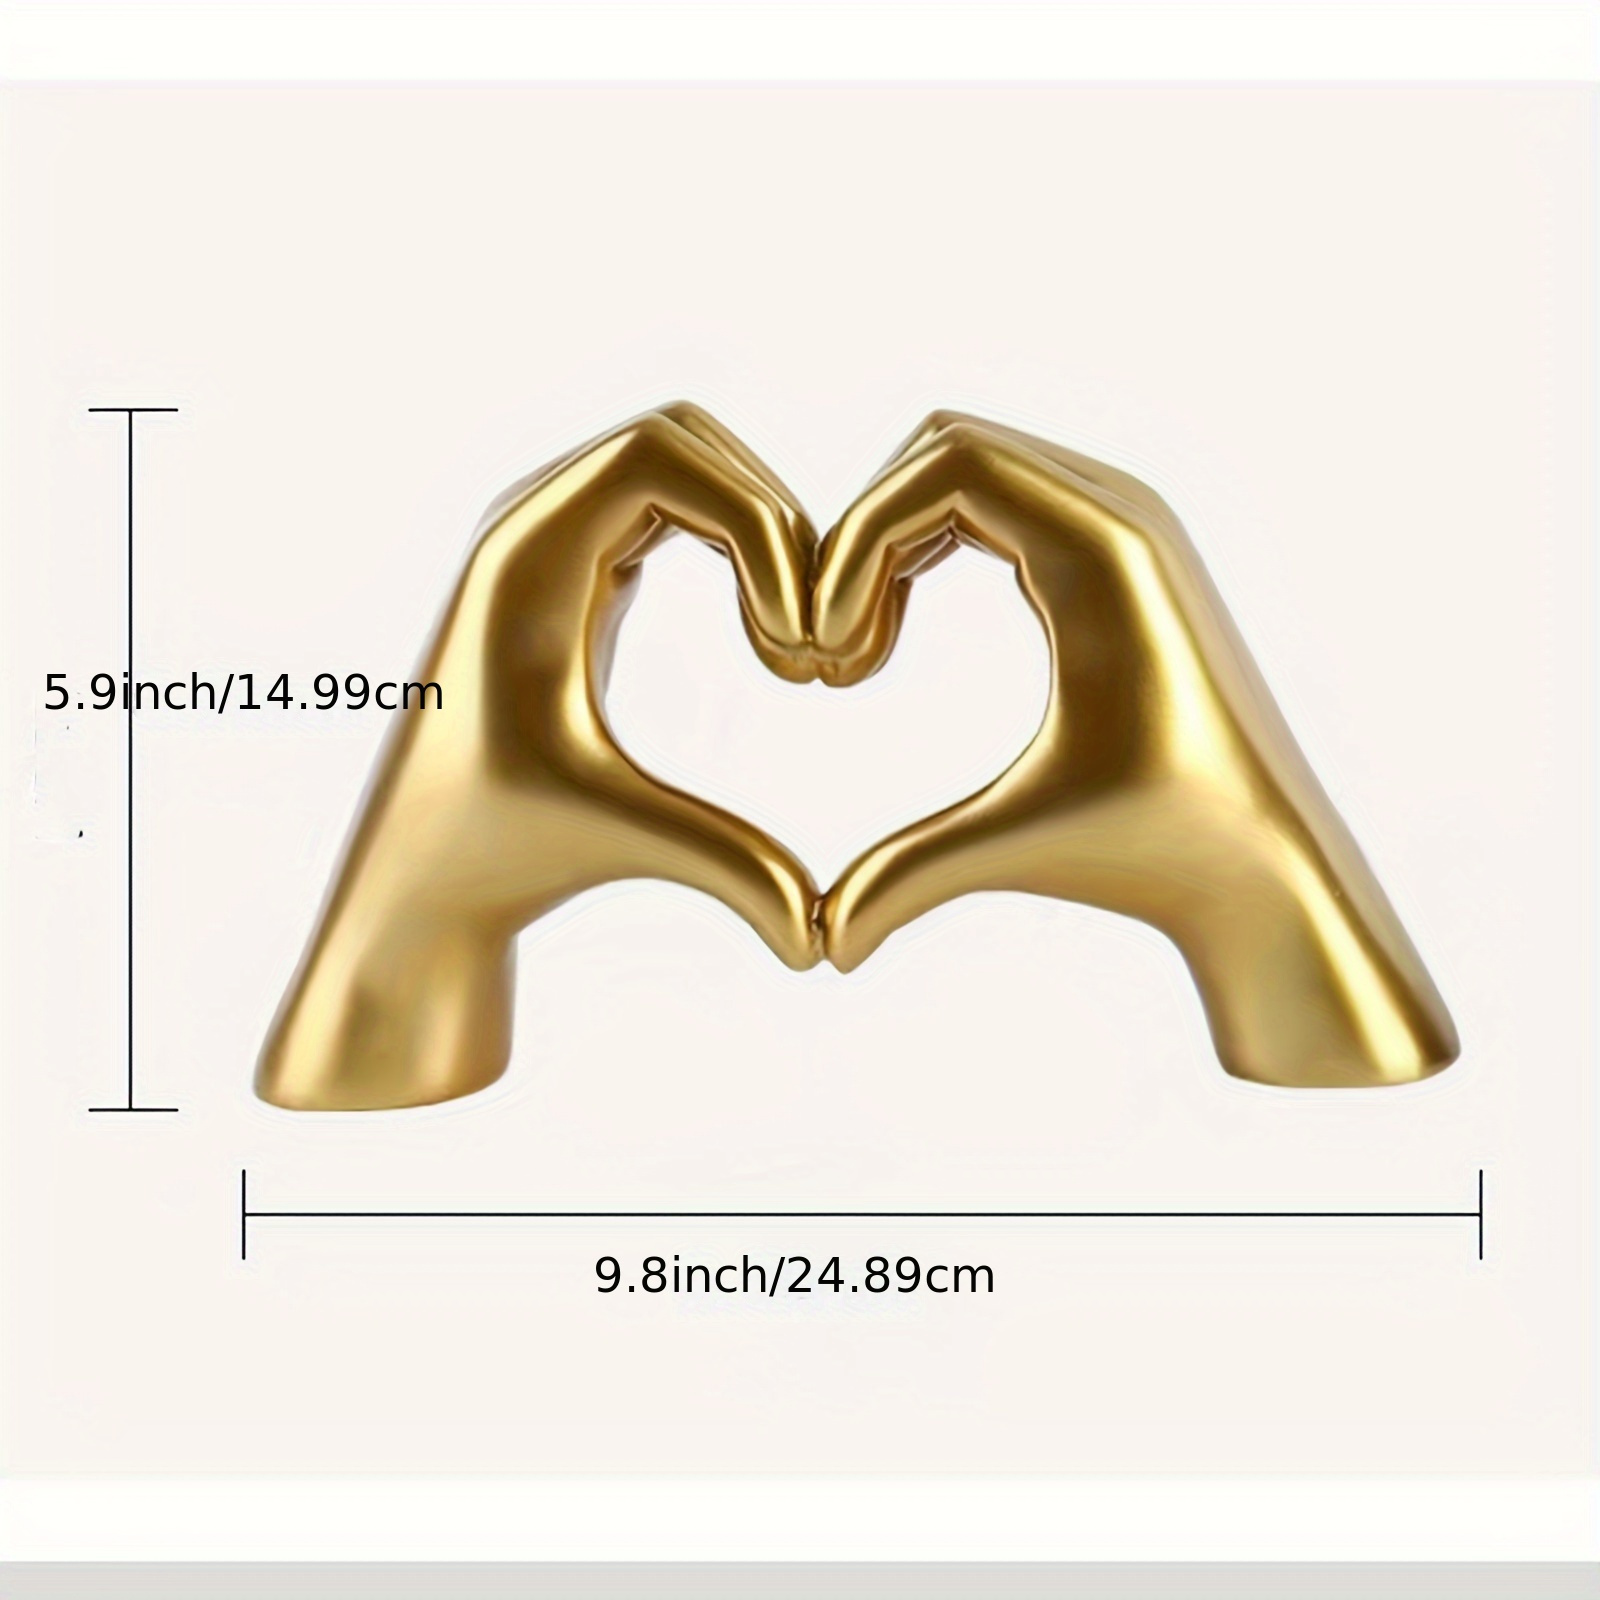 

Finger Statue Golden Gesture Decoration Can Be Used For Couples, Couples Souvenirs And Gifts